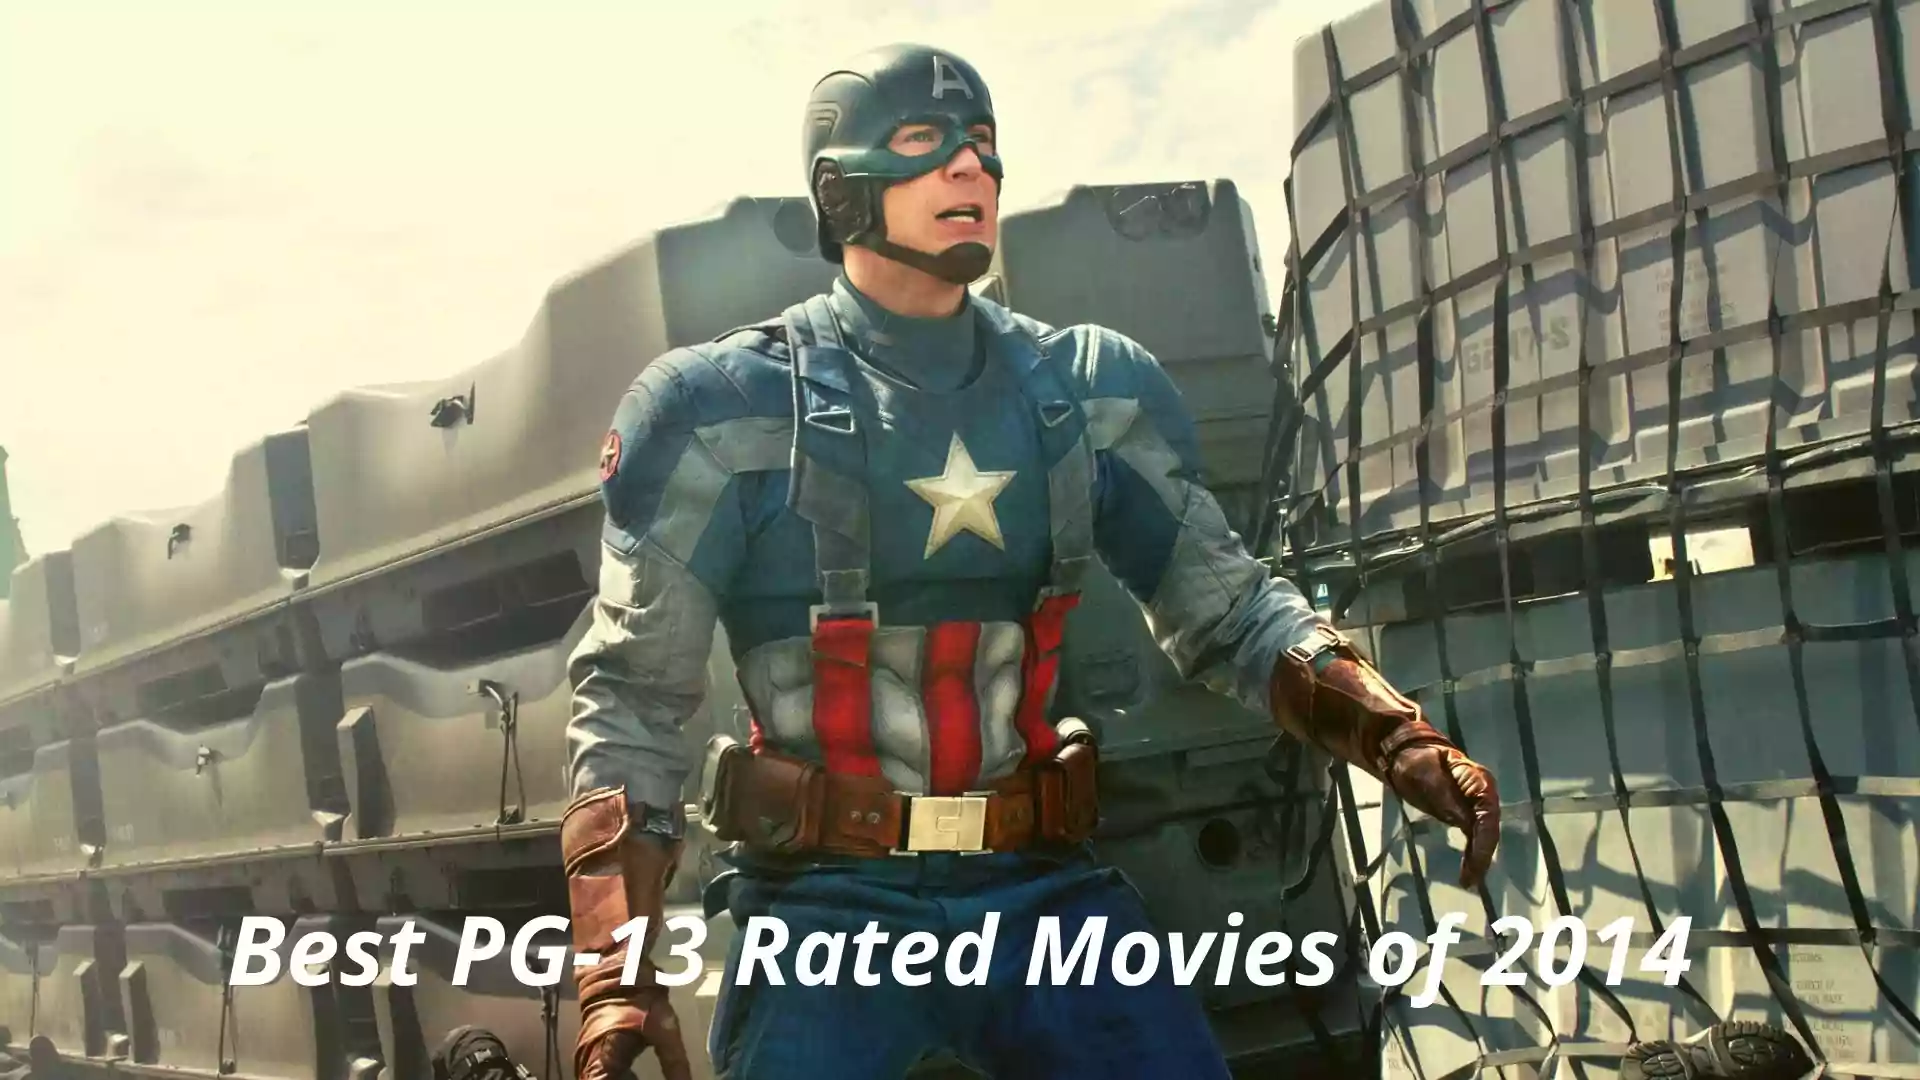 Best PG-13 Rated Movies of 2014